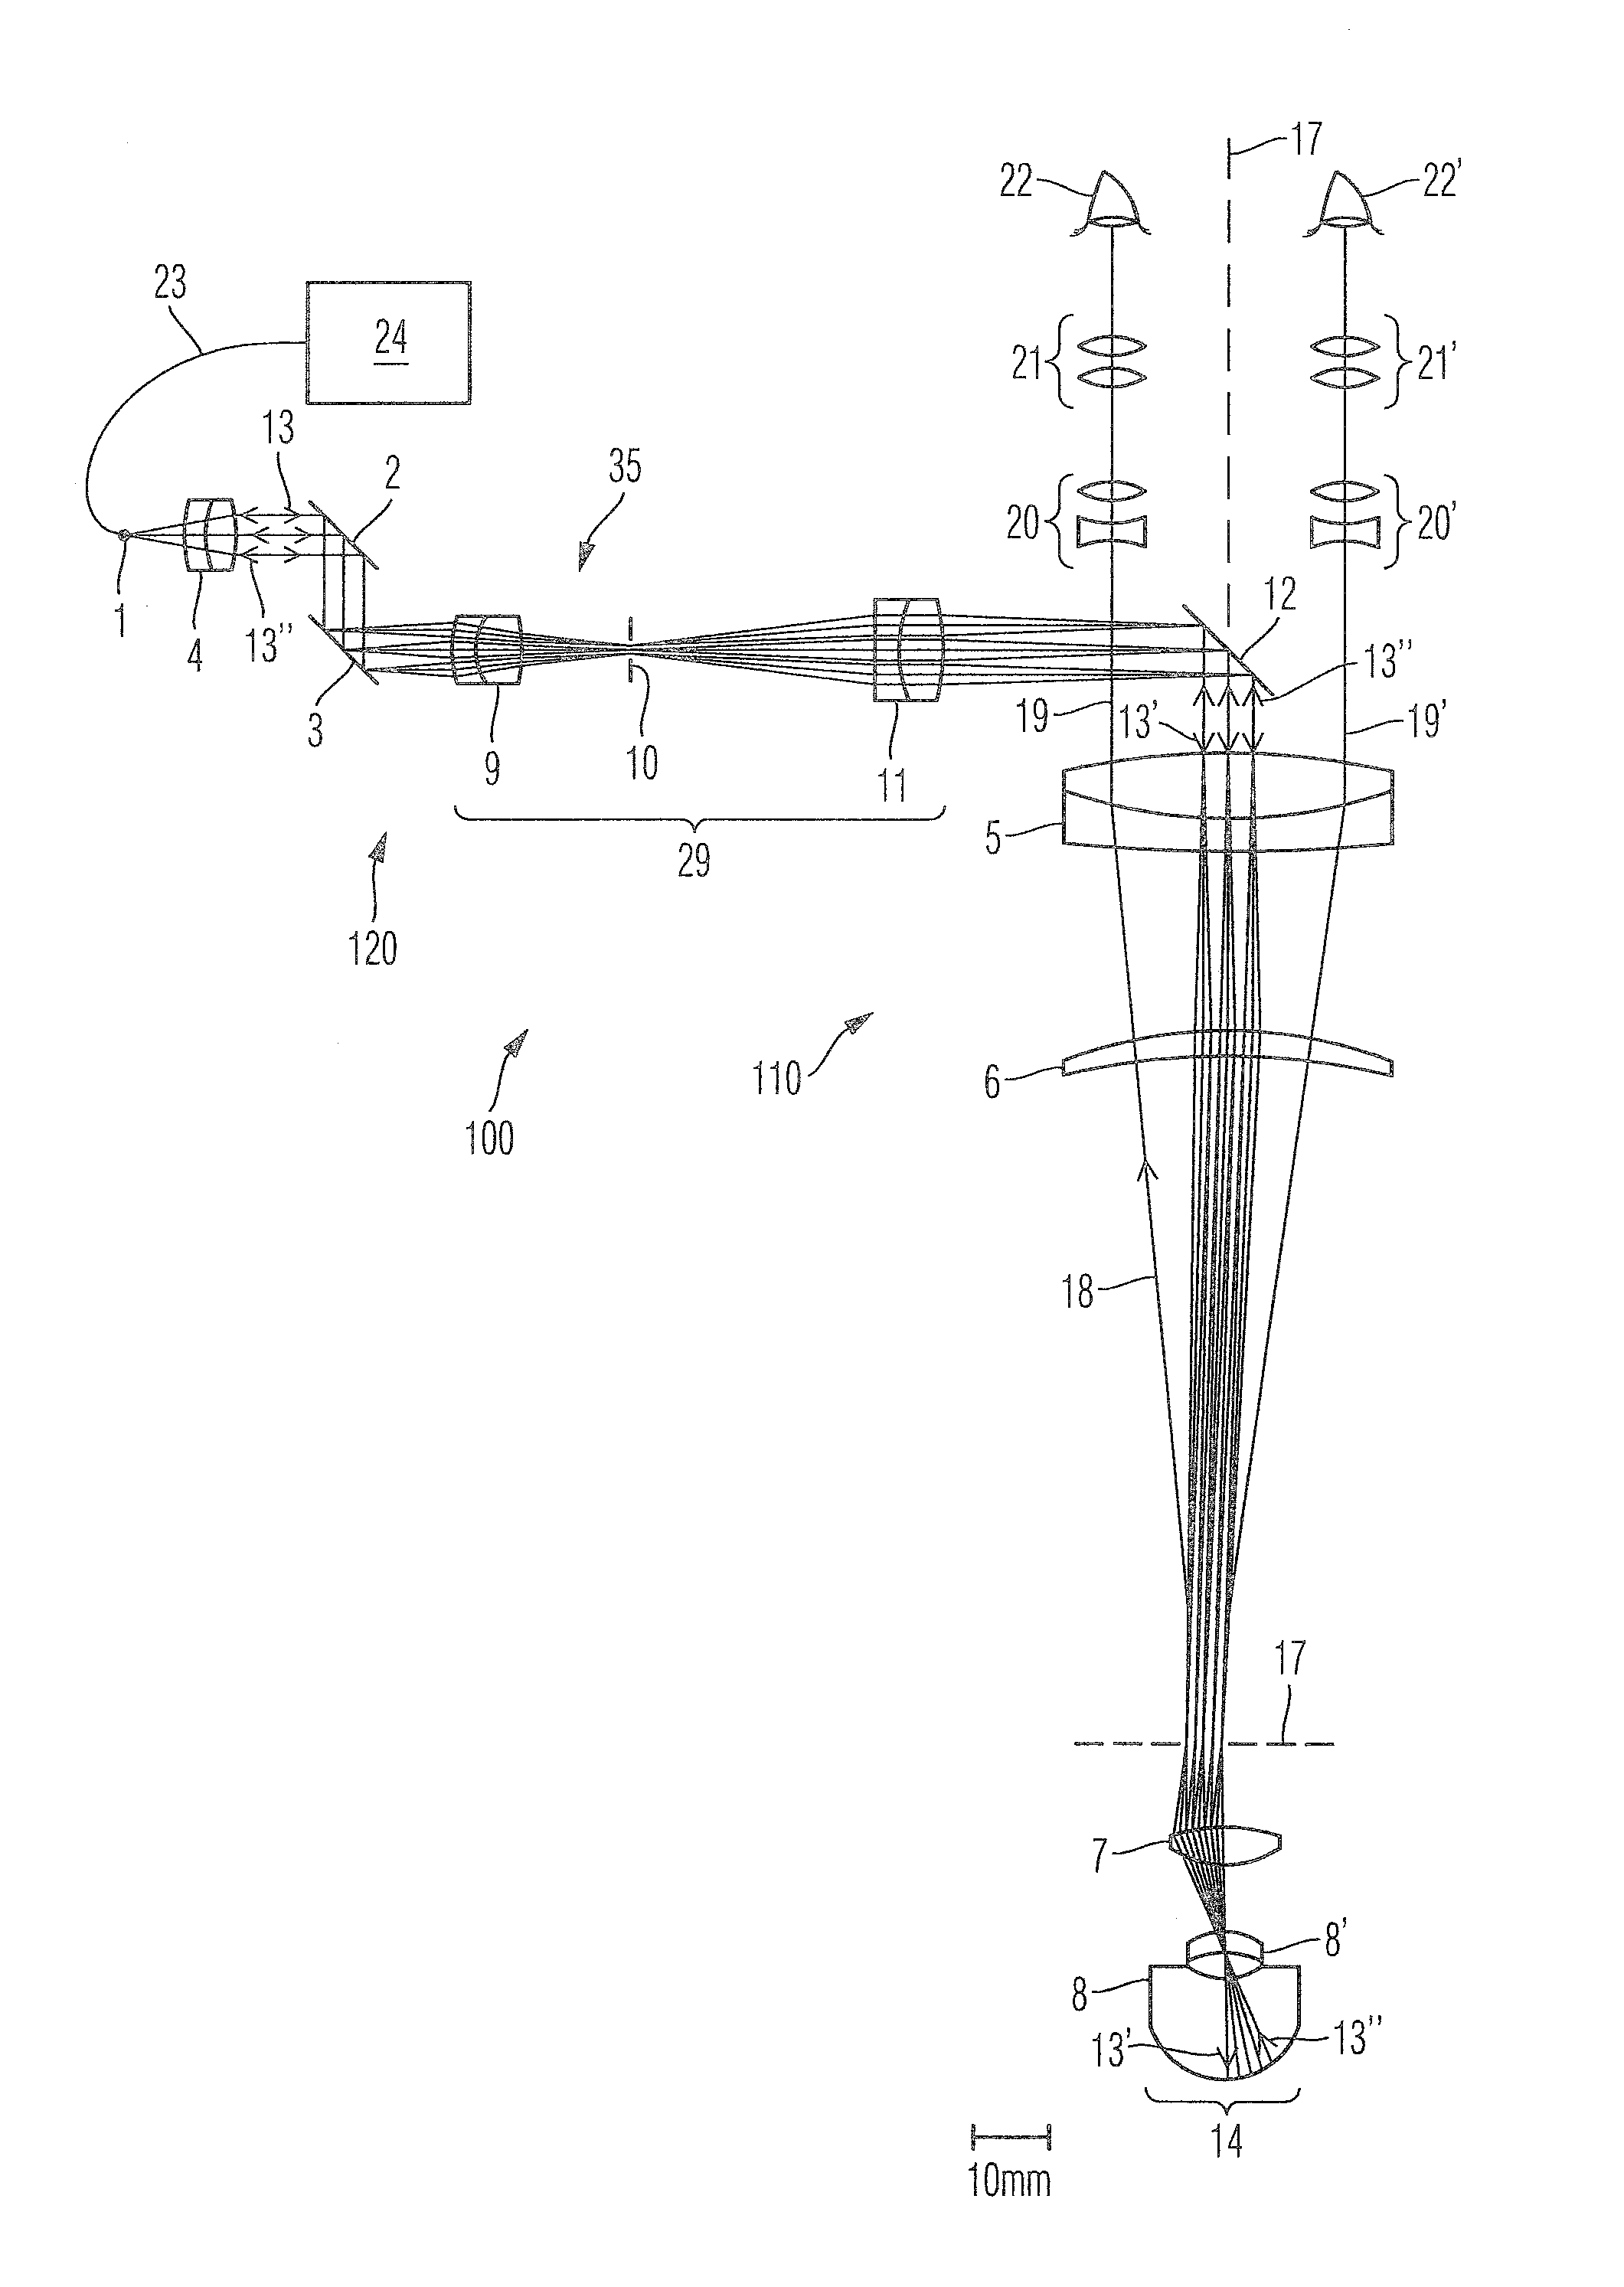 Surgical microscopy system having an optical coherence tomography facility